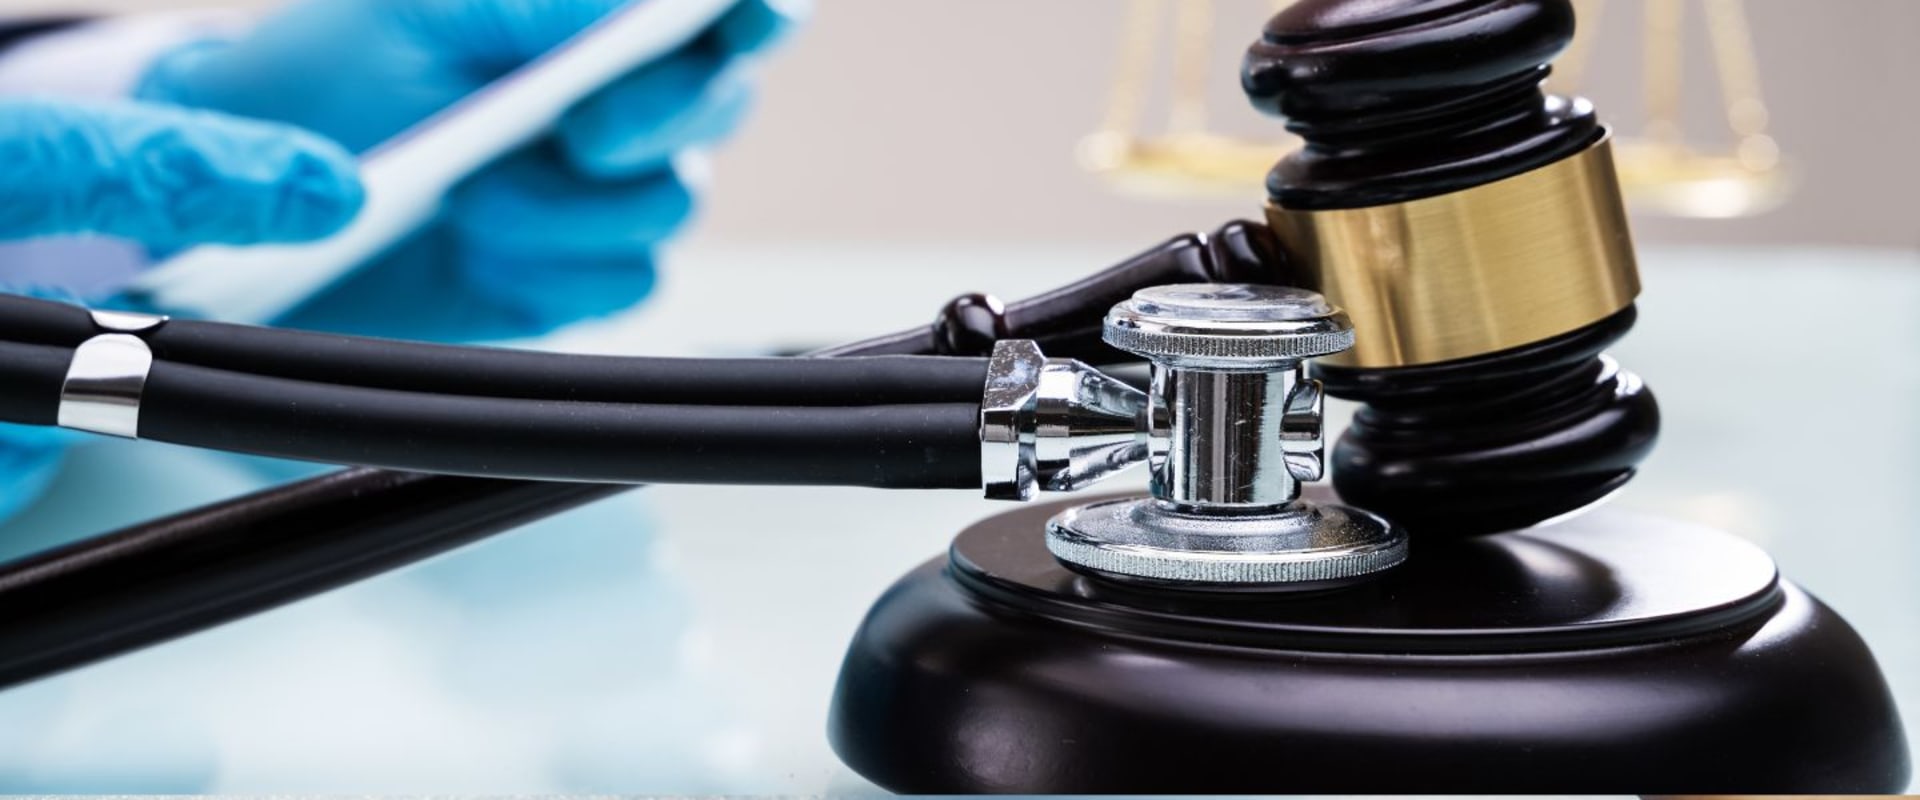 What are the 3 key principles of defenses in a malpractice lawsuit?